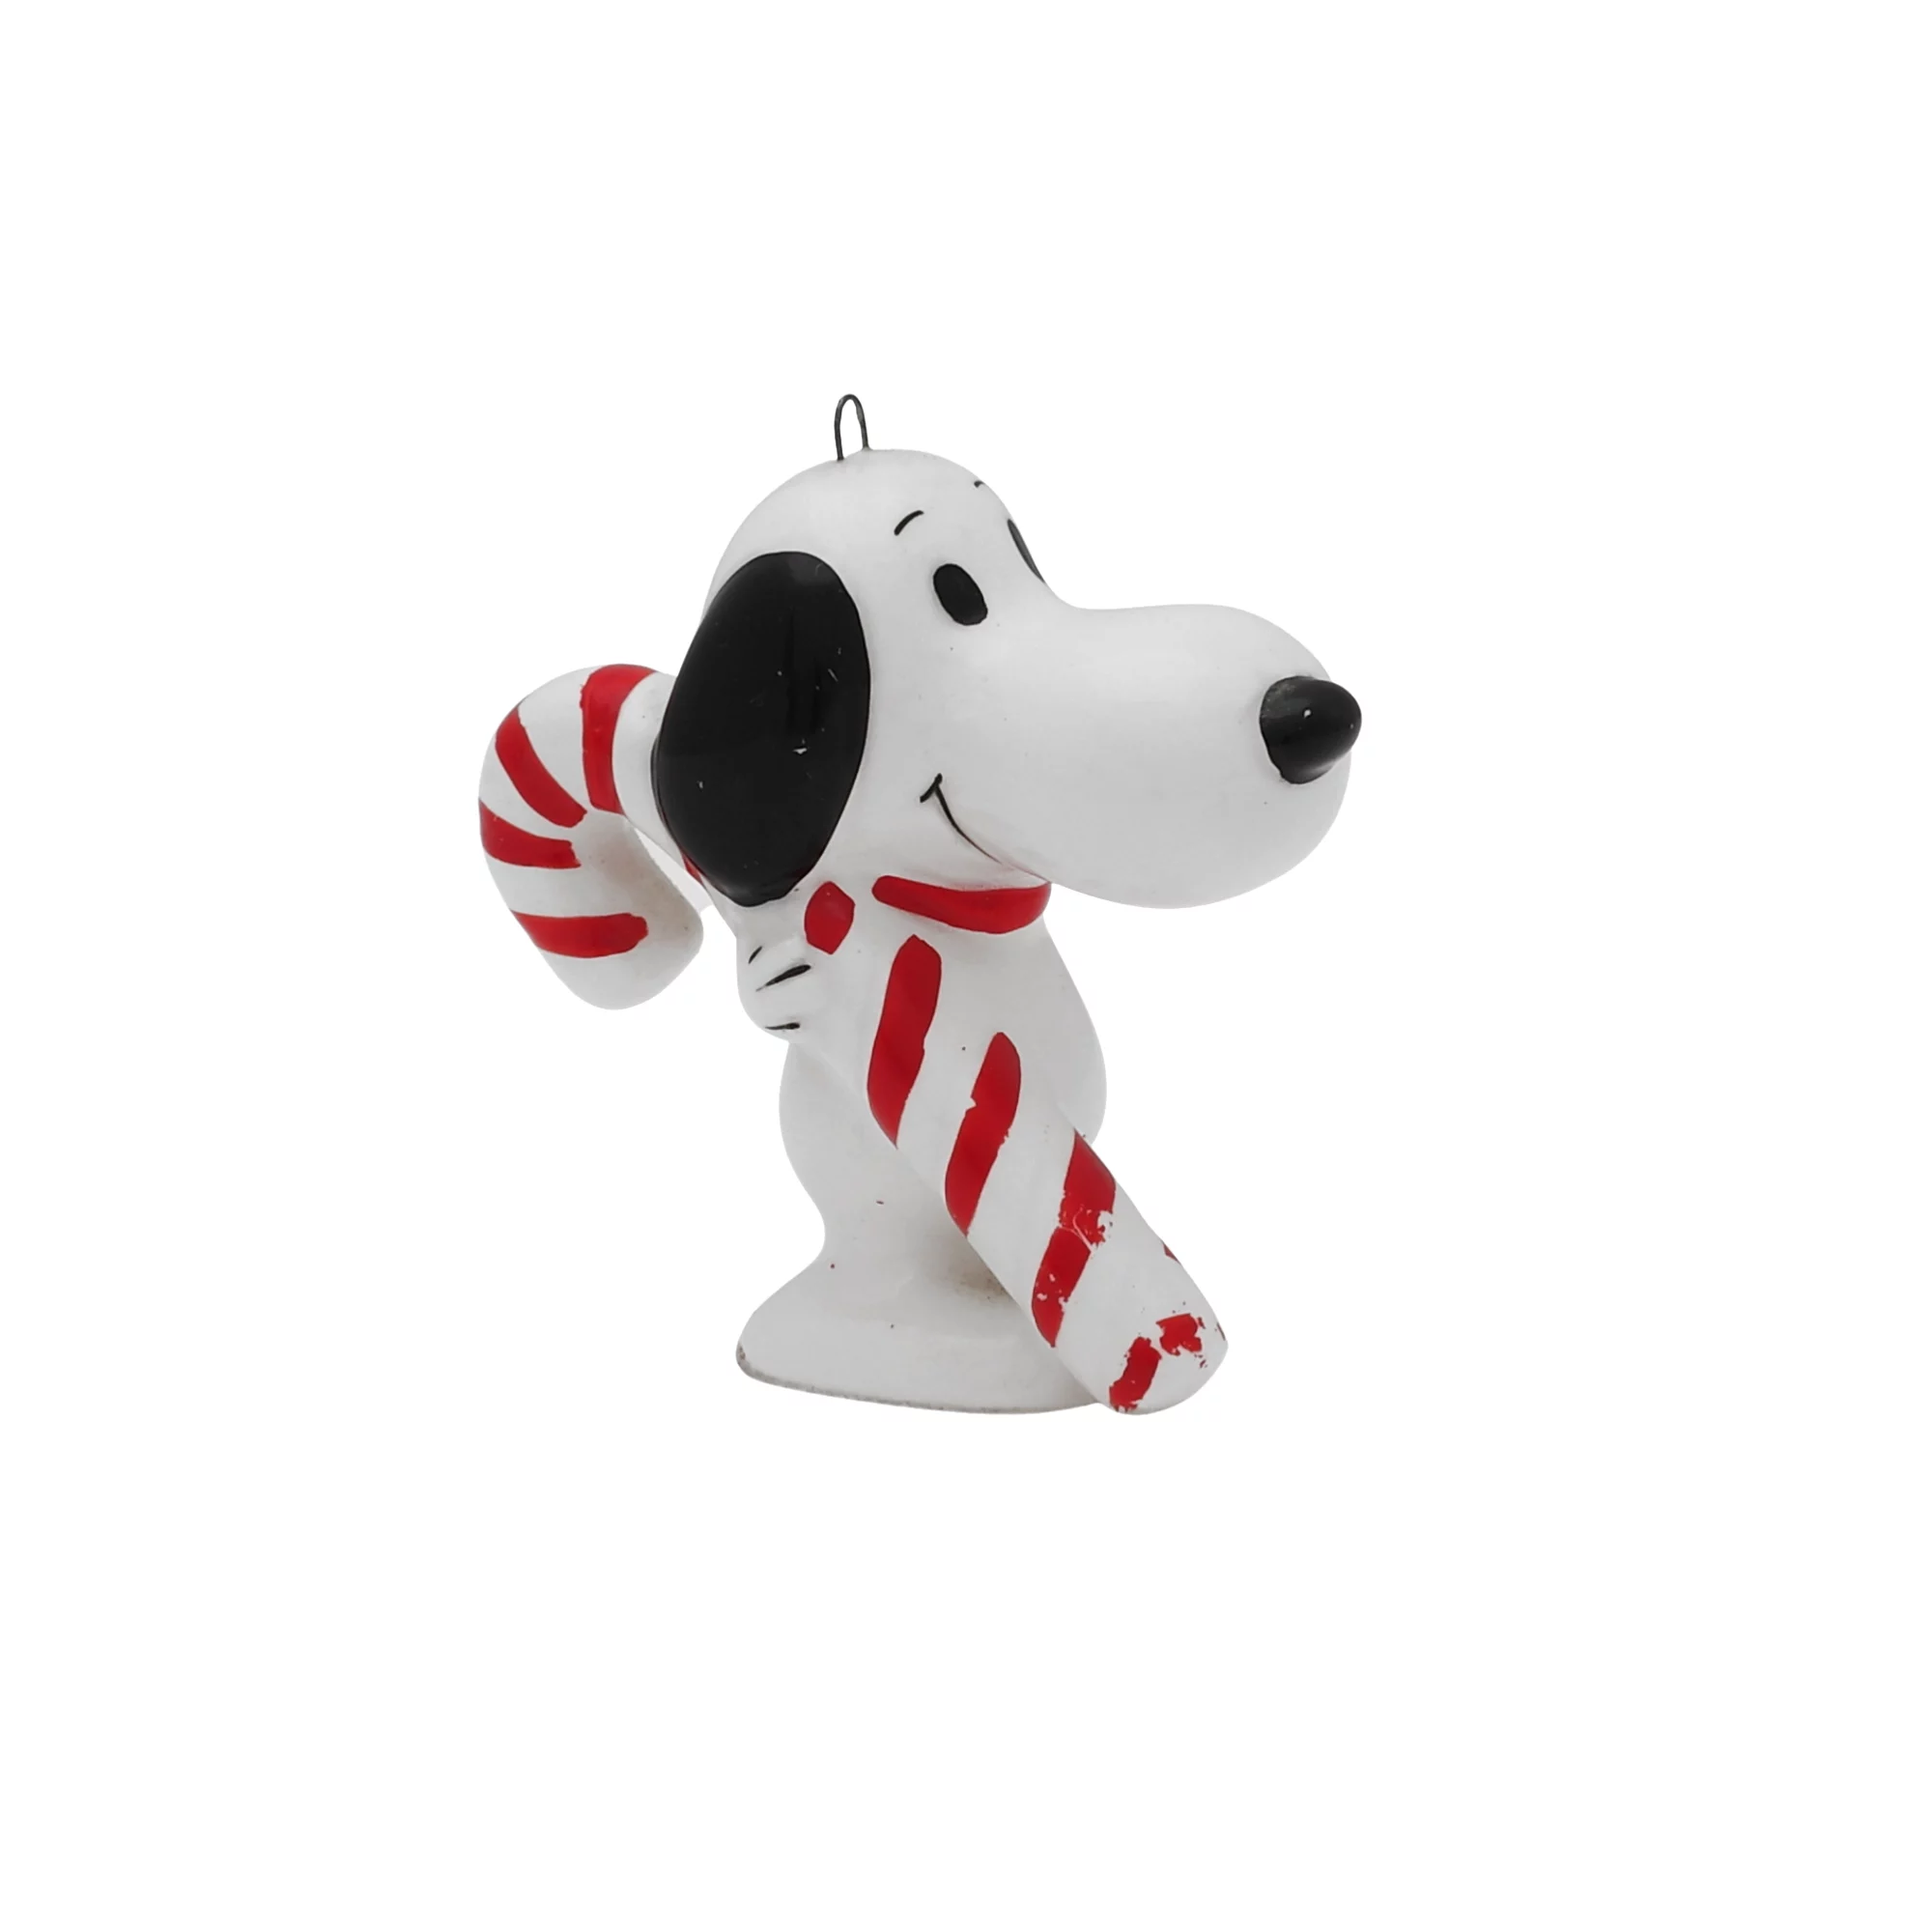 Vintage Snoopy Candy Cane Christmas Ornament